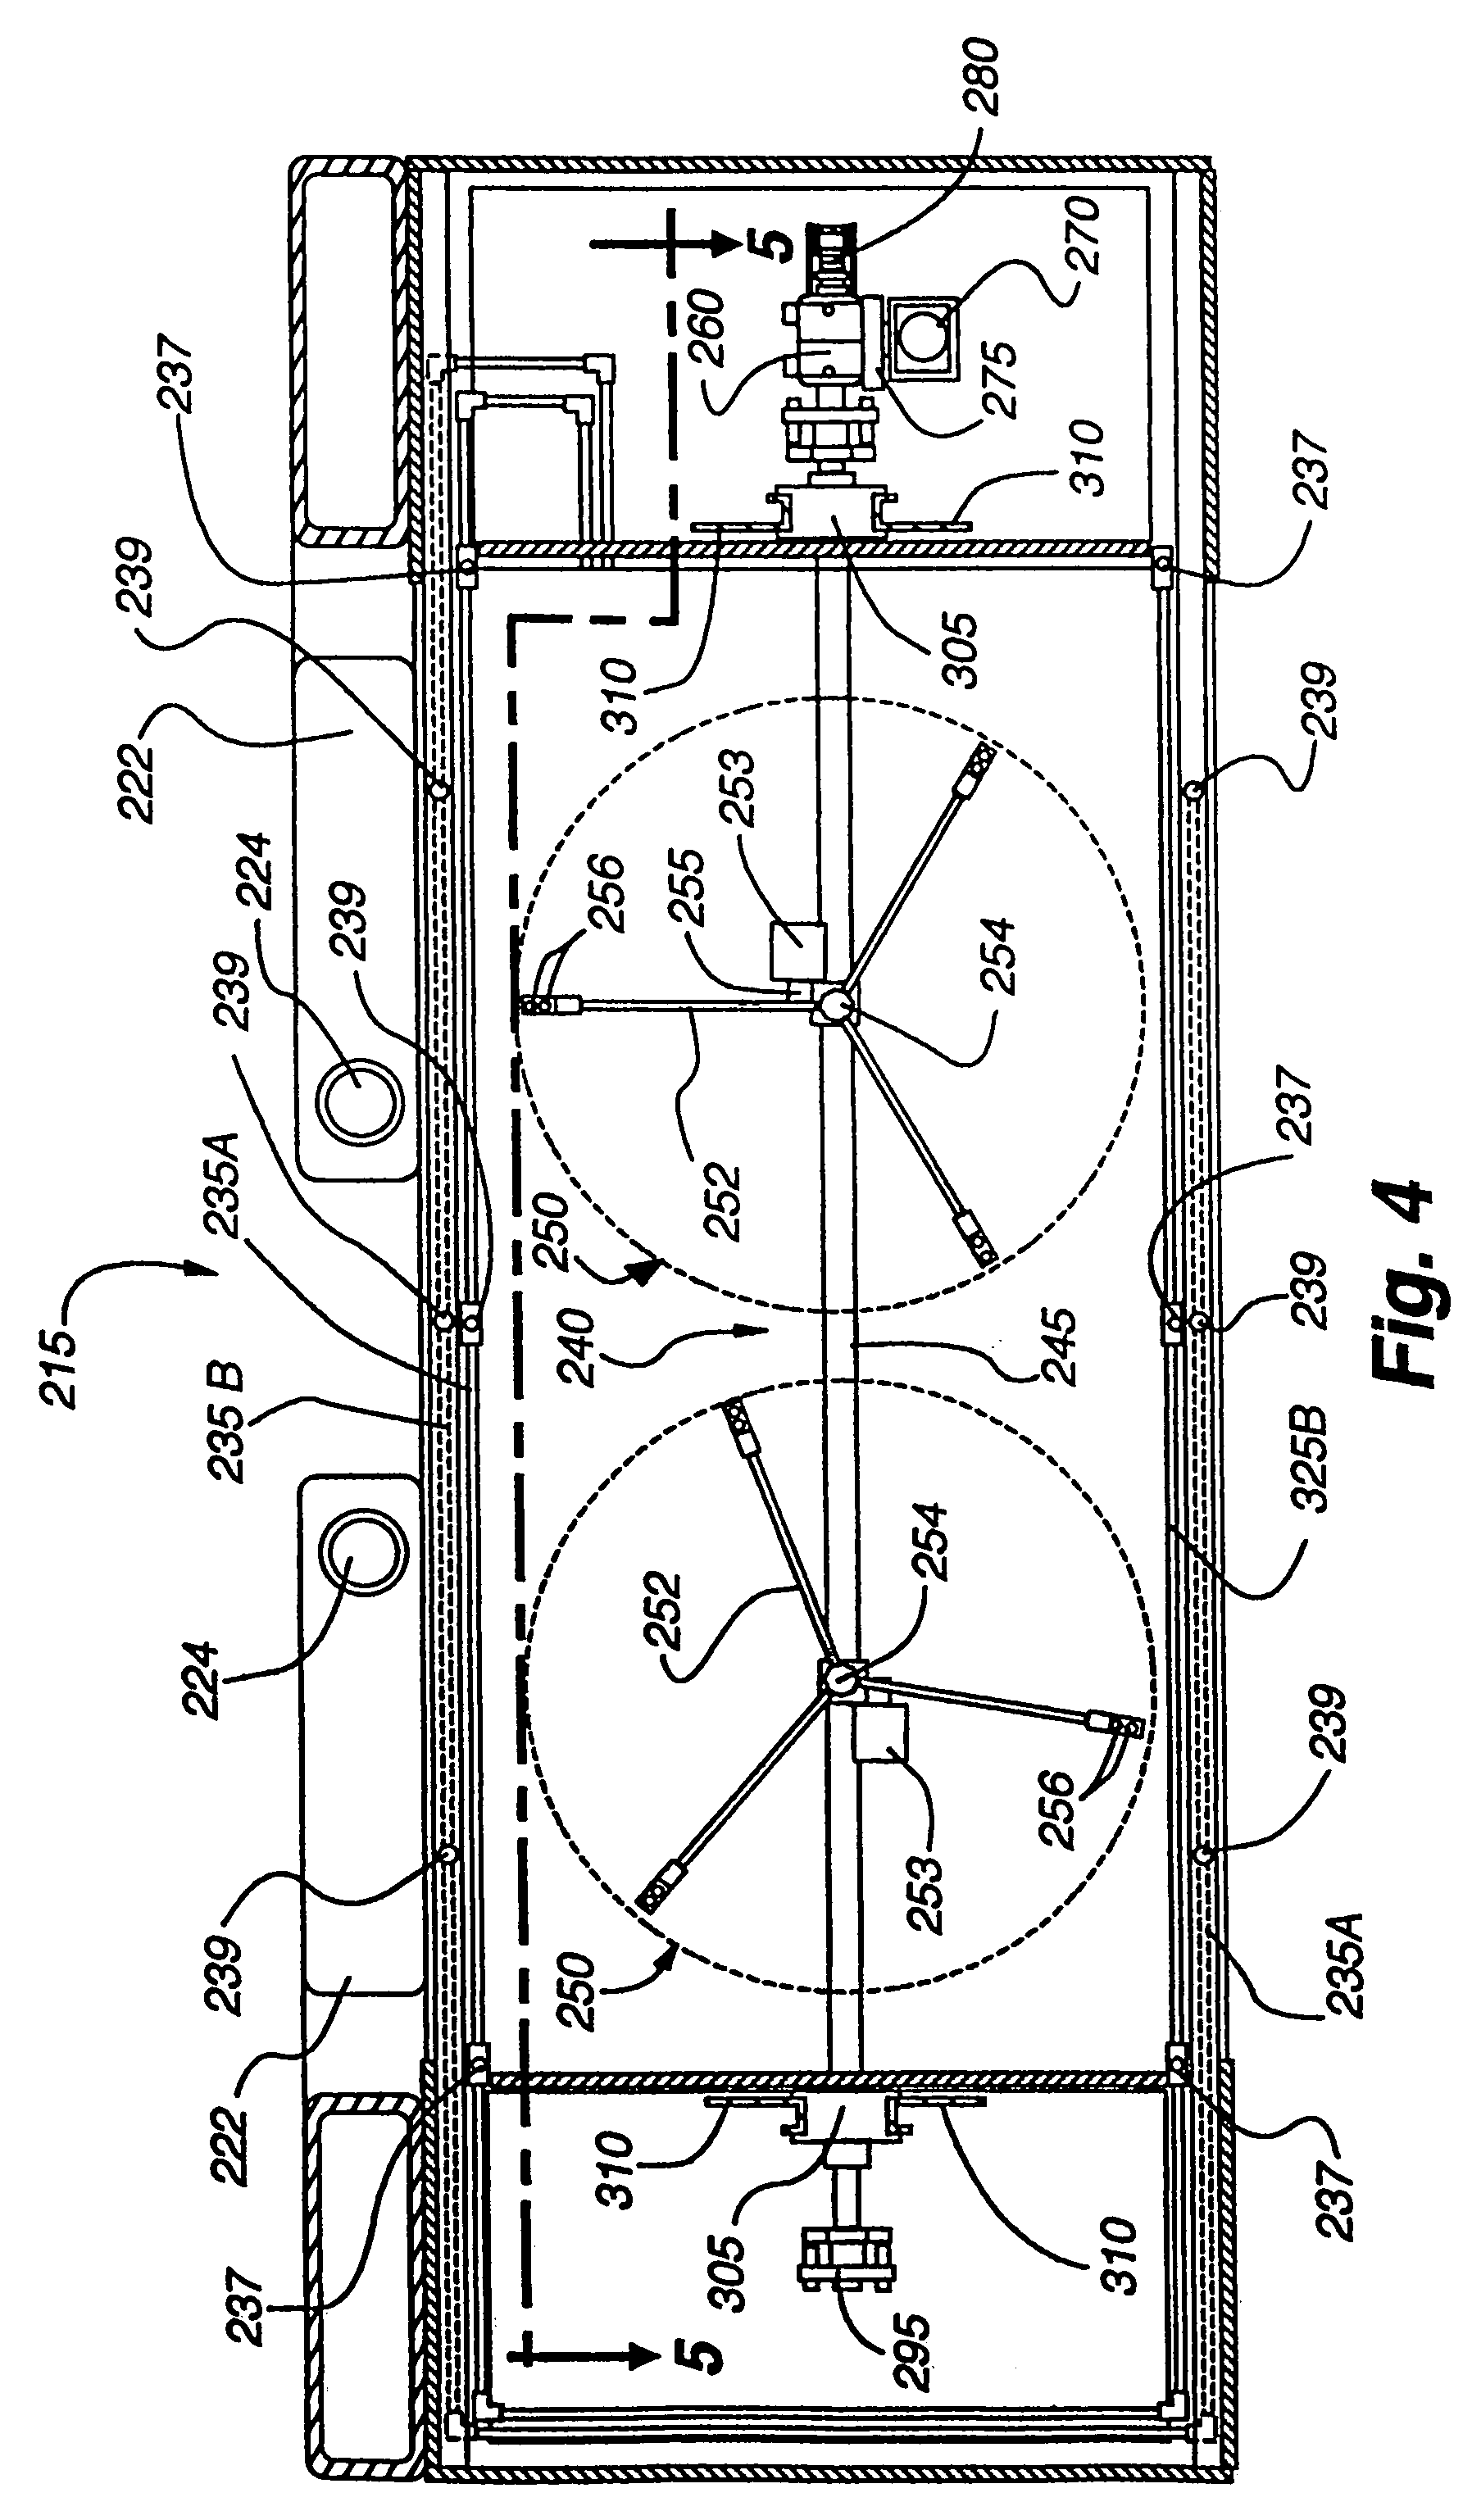 Vehicle wash apparatus with an adjustable boom